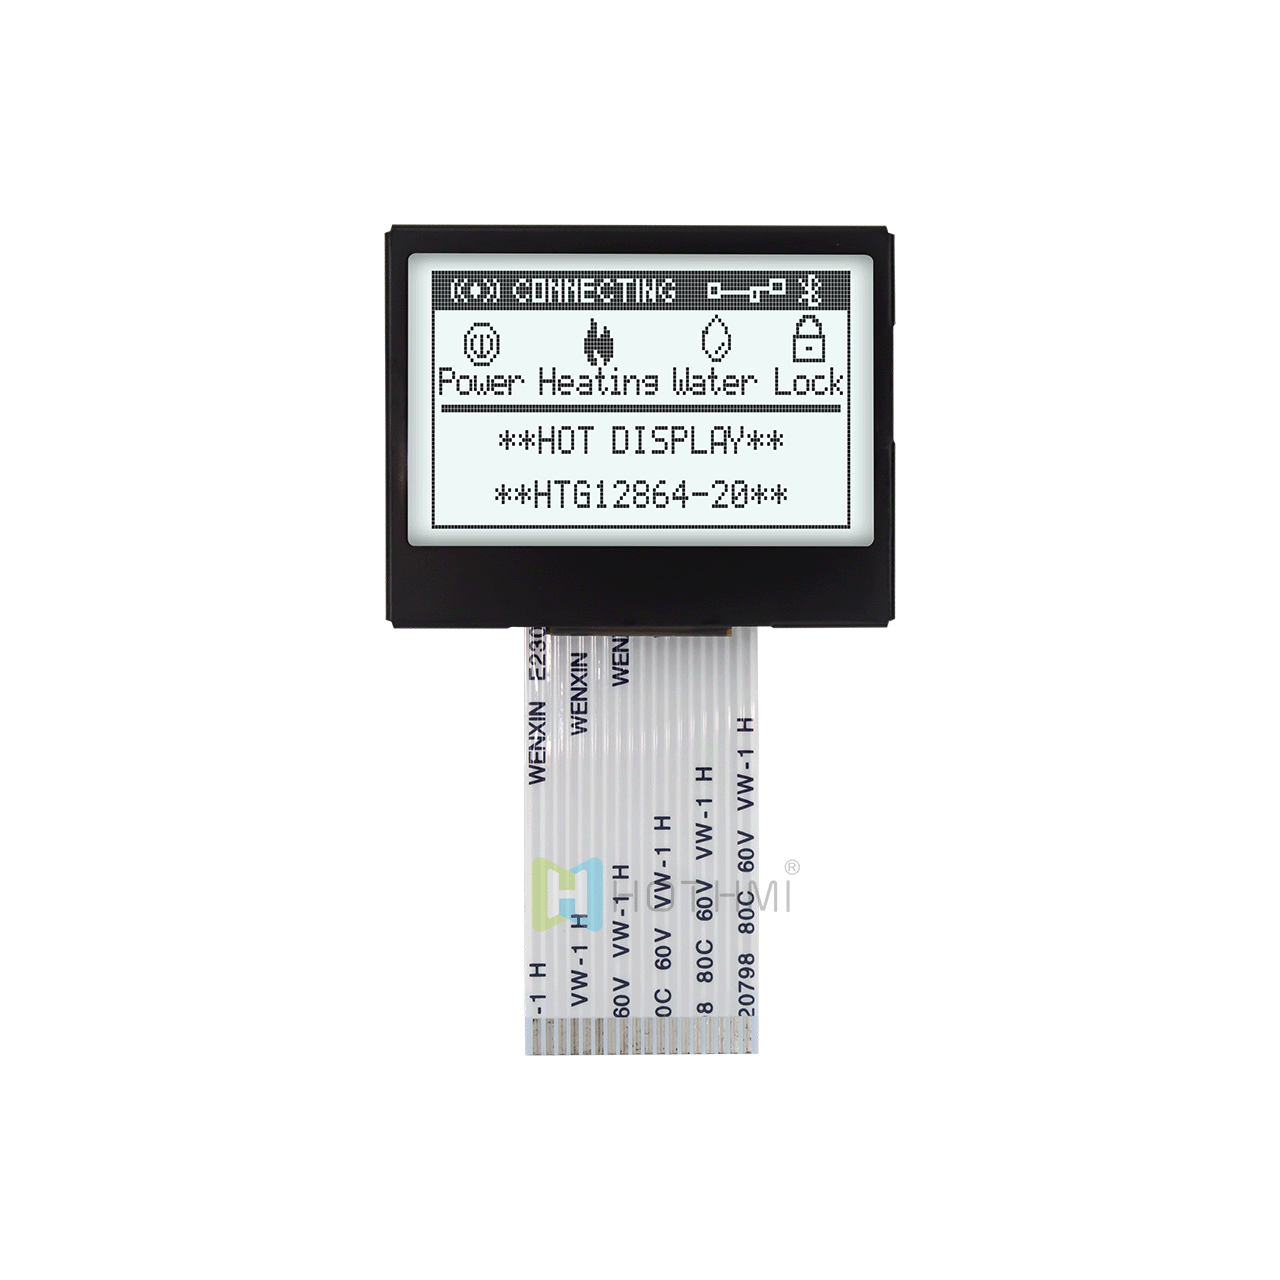 1.7 inches | 128 x 64 low-cost graphic LCD module | gray text on white 128x64 graphic LCD module | ST7565R | MCU interface | Arduino